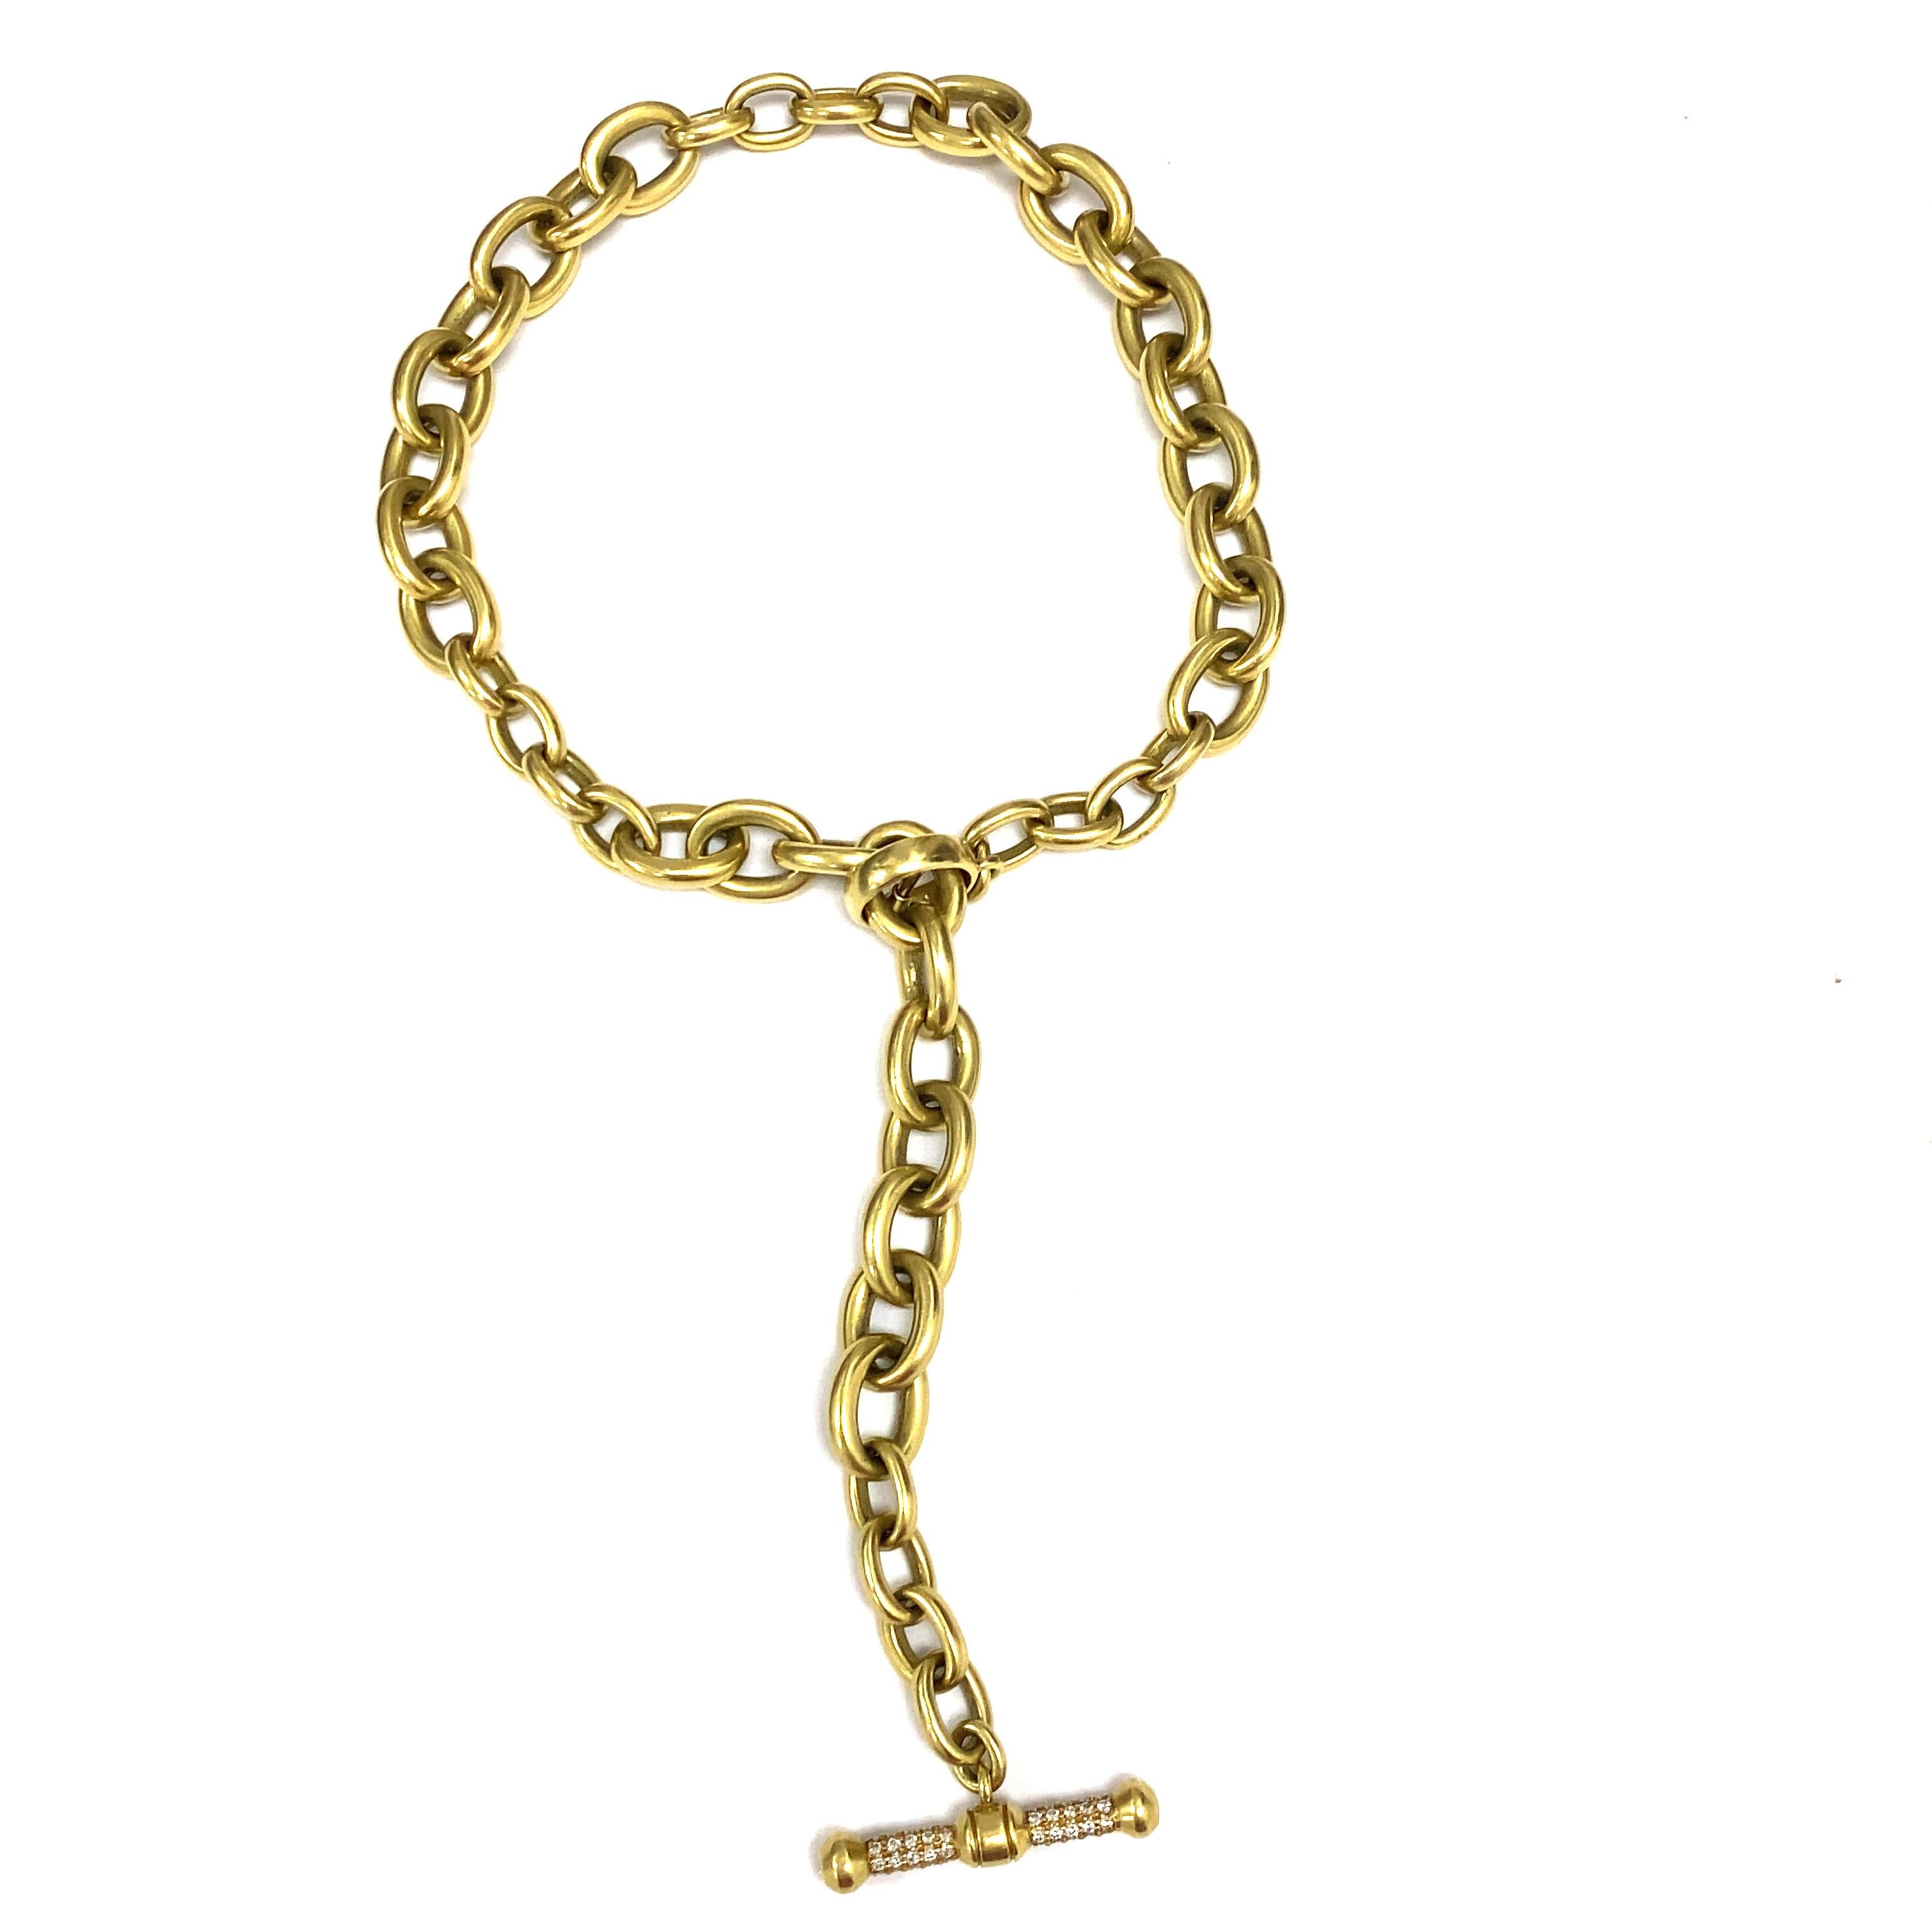 Barry Kieselstein Cord Chain Necklace Diamond Toggle in 18K Yellow Gold.  Round Brilliant Cut Diamonds weighing 0.70 carat total weight, F-G in color and VS in clarity are expertly set.  The Necklace measures 17 1/2 inch in length and 1/2 inch in